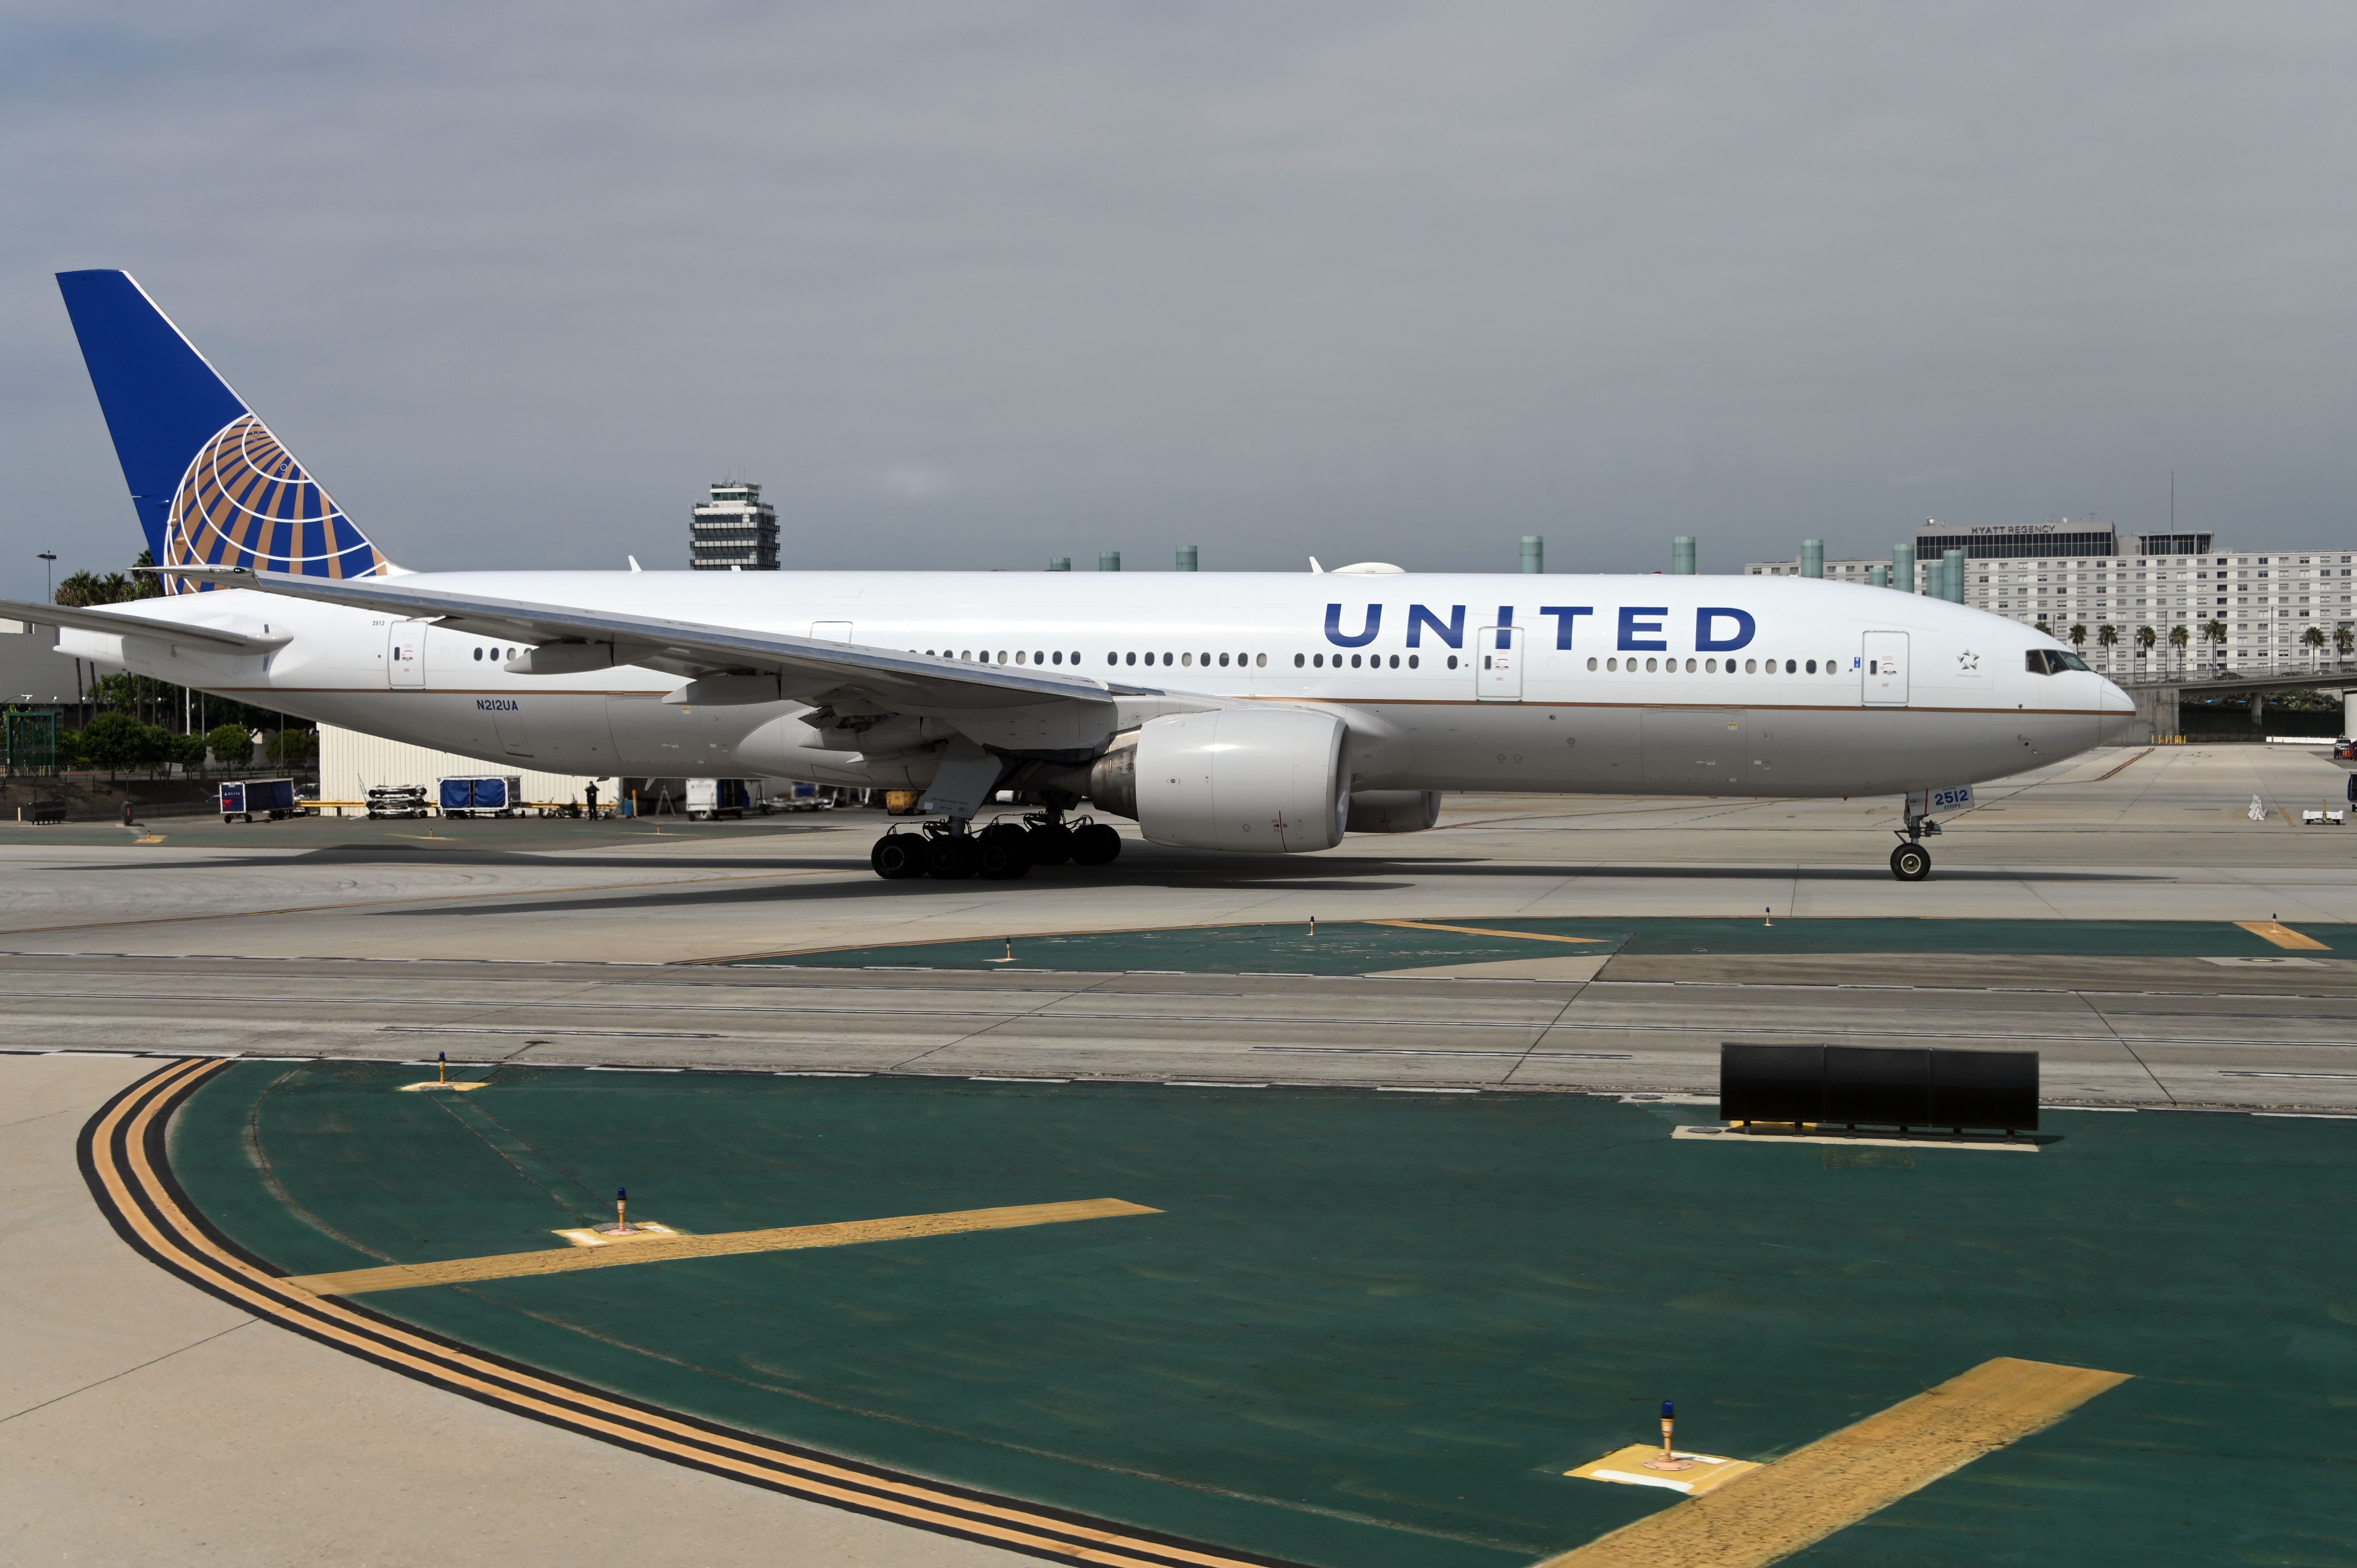 A United Airlines plane at Los Angeles International Airport on September 27, 2019.